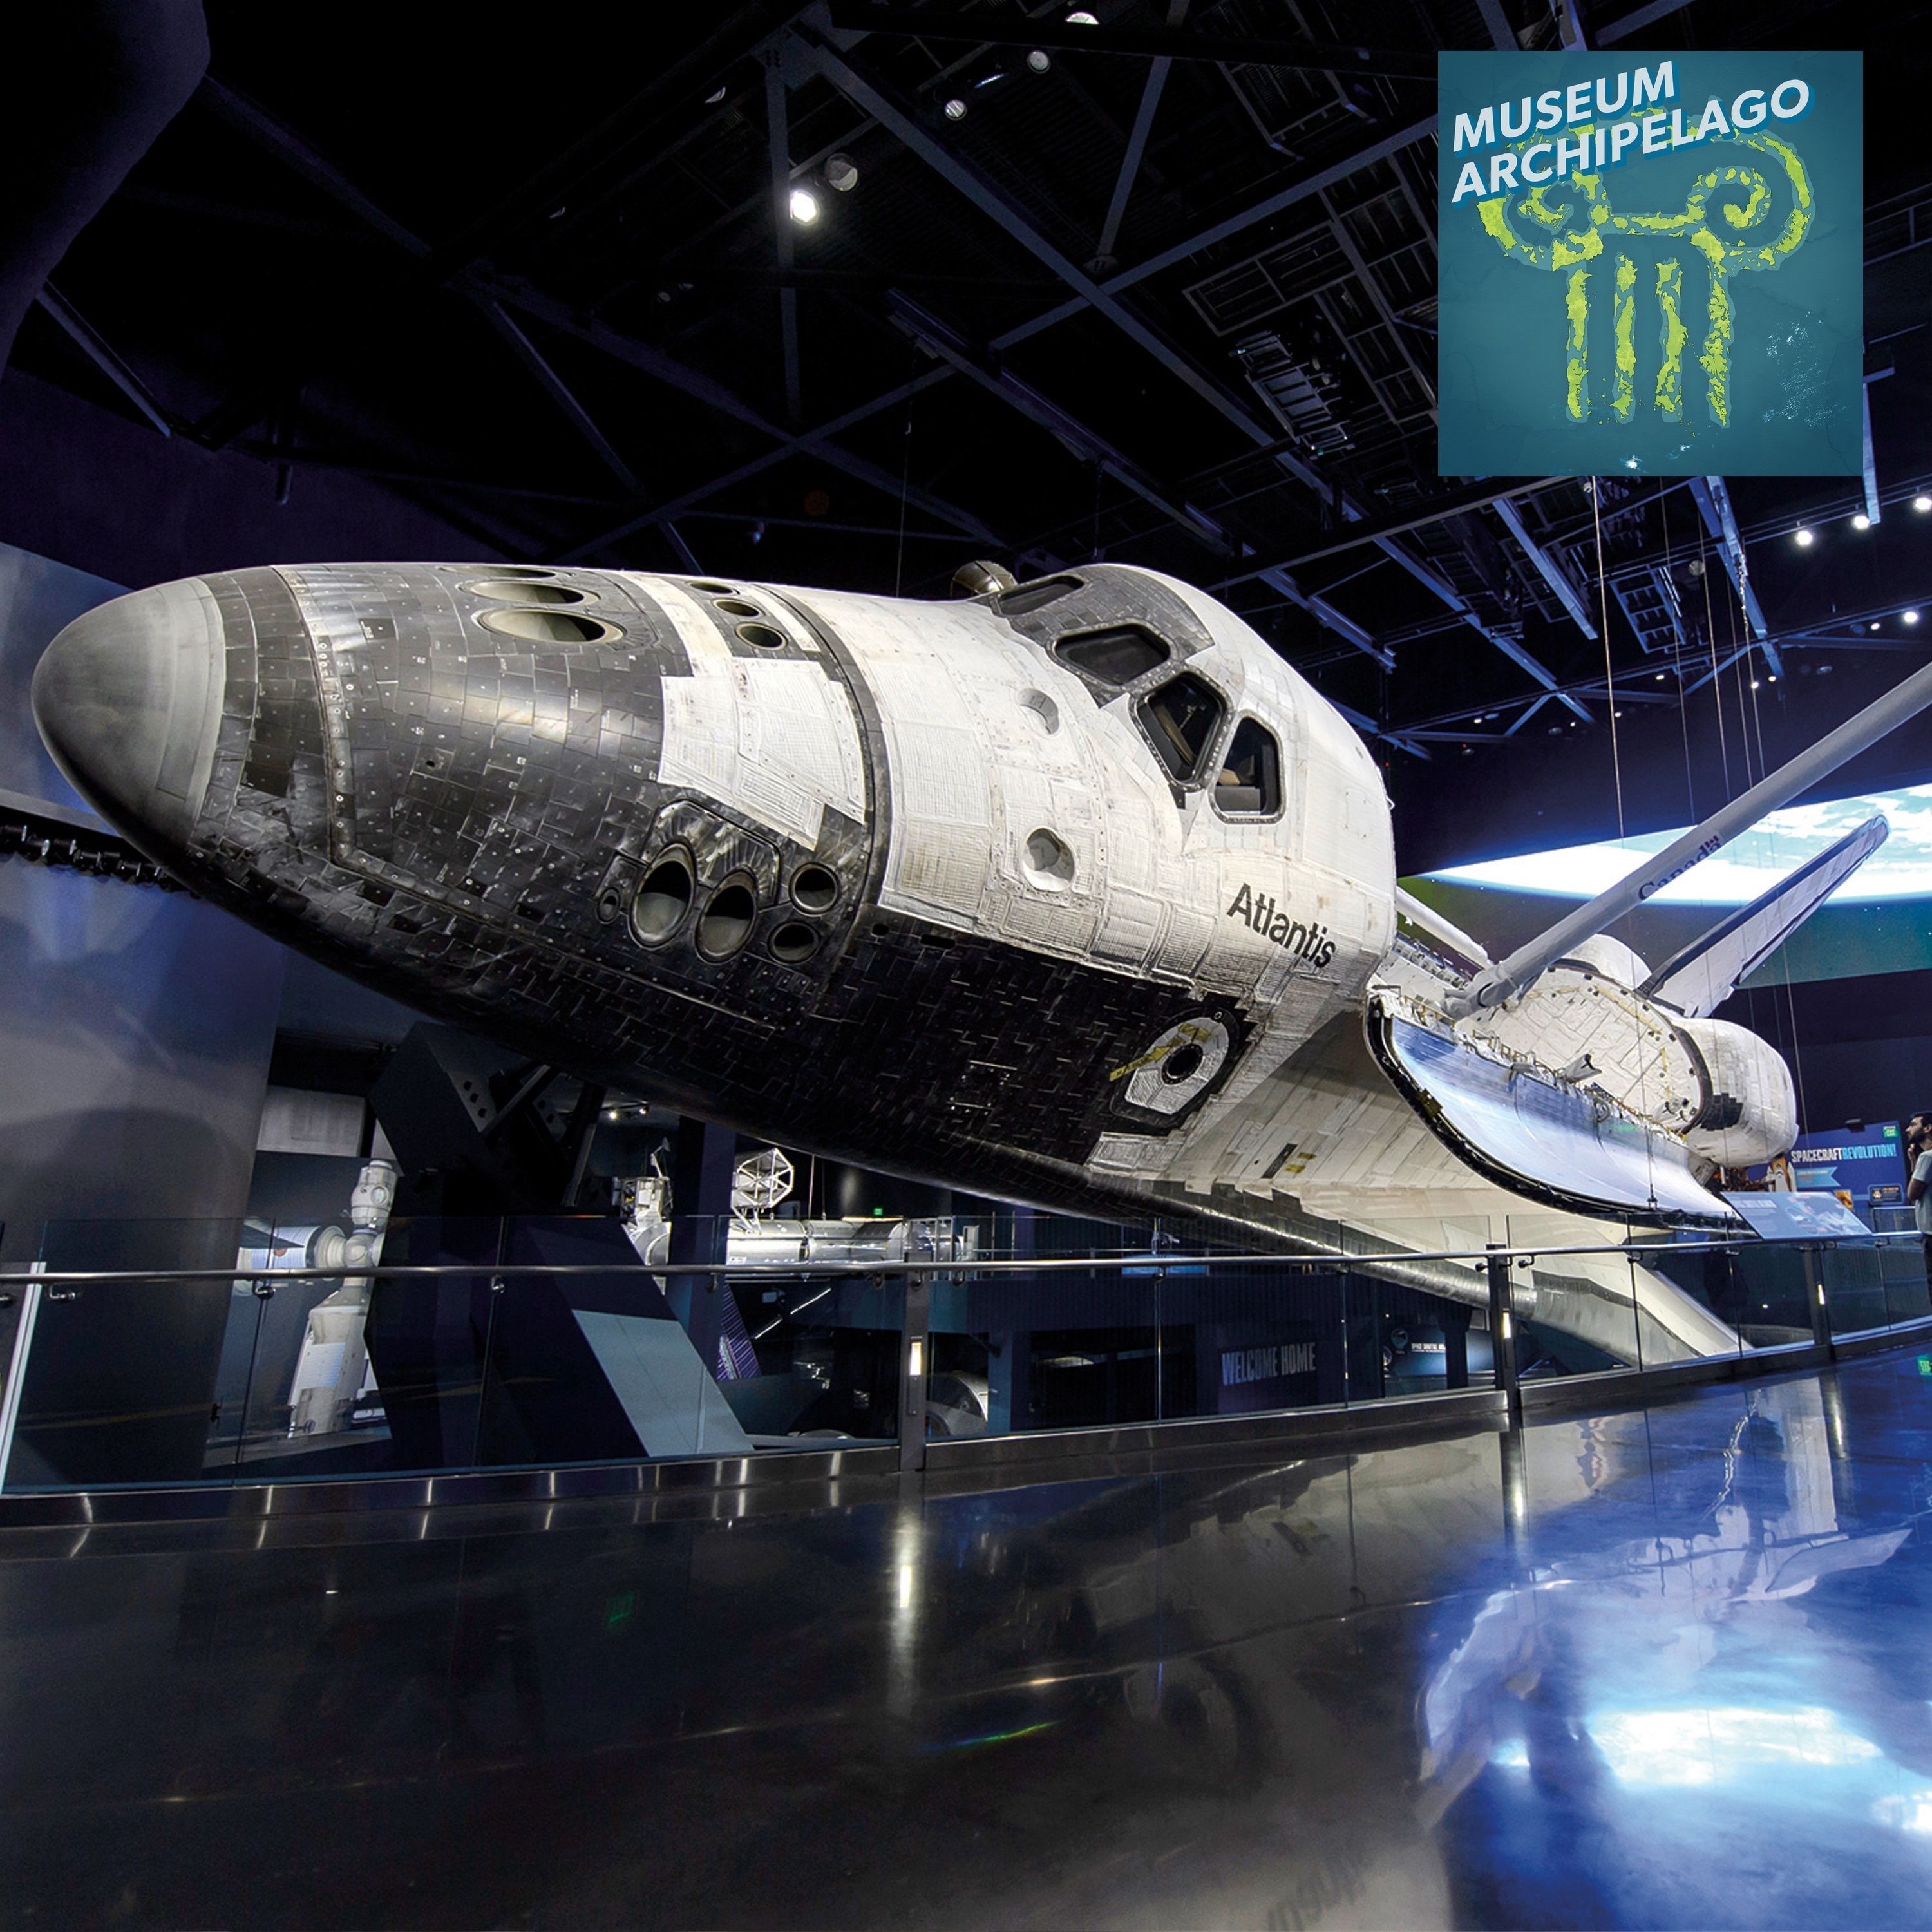 64. Kennedy Space Center’s Shuttle Atlantis Experience Is Part Museum, Part Themed Attraction